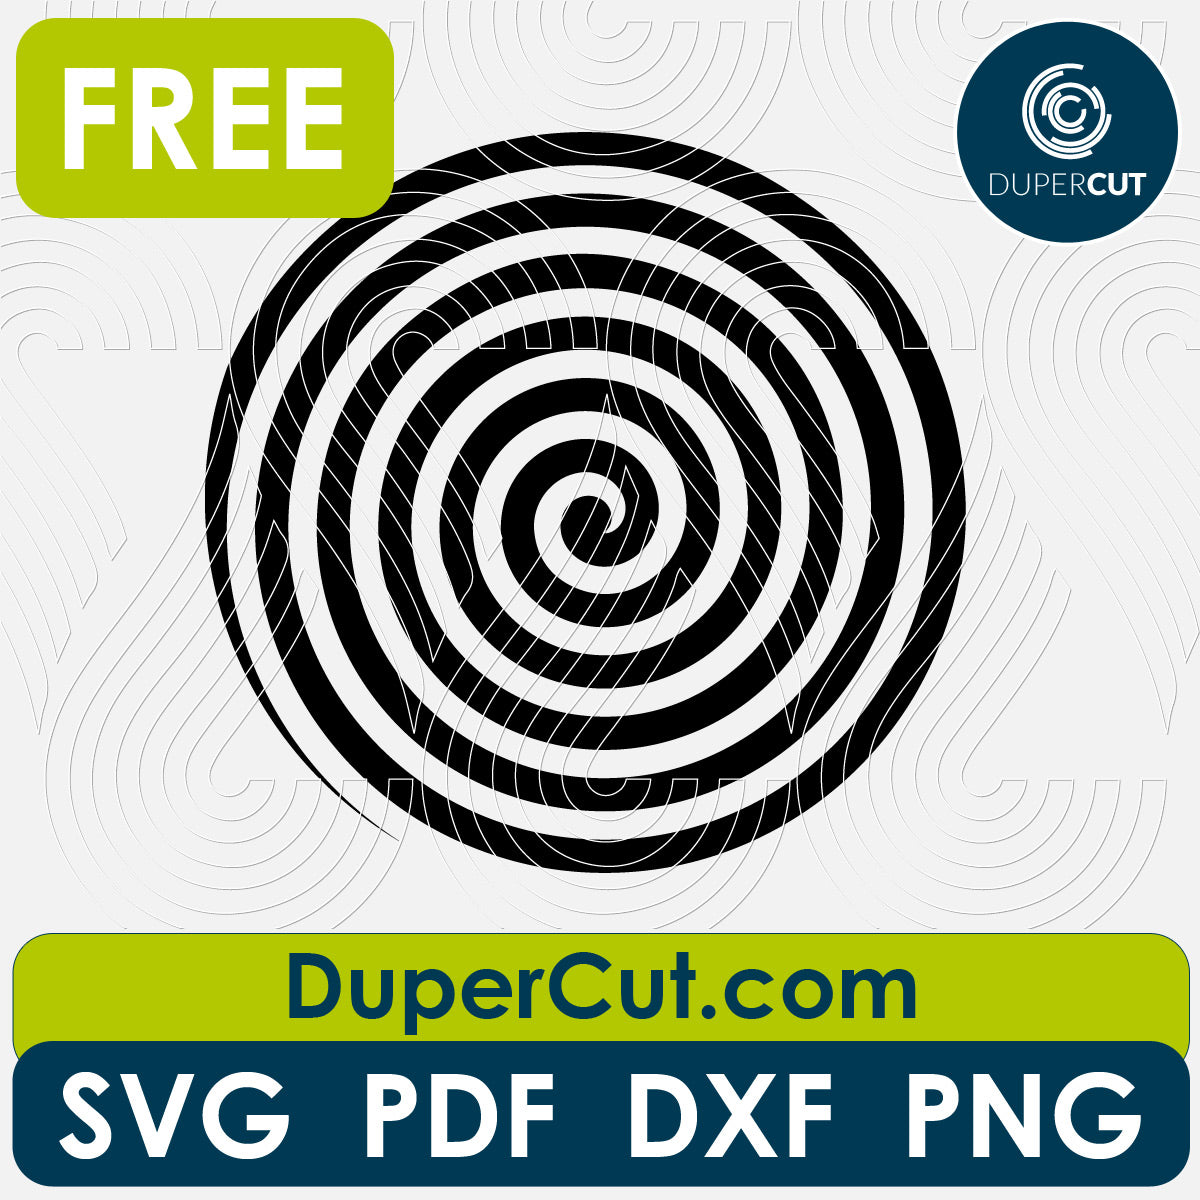 Optical illusion round hypnose pattern - free SVG PNG DXF vector files for laser and blade cutting machines. Glowforge, Cricut, Silhouette cameo templates by DuperCut.com